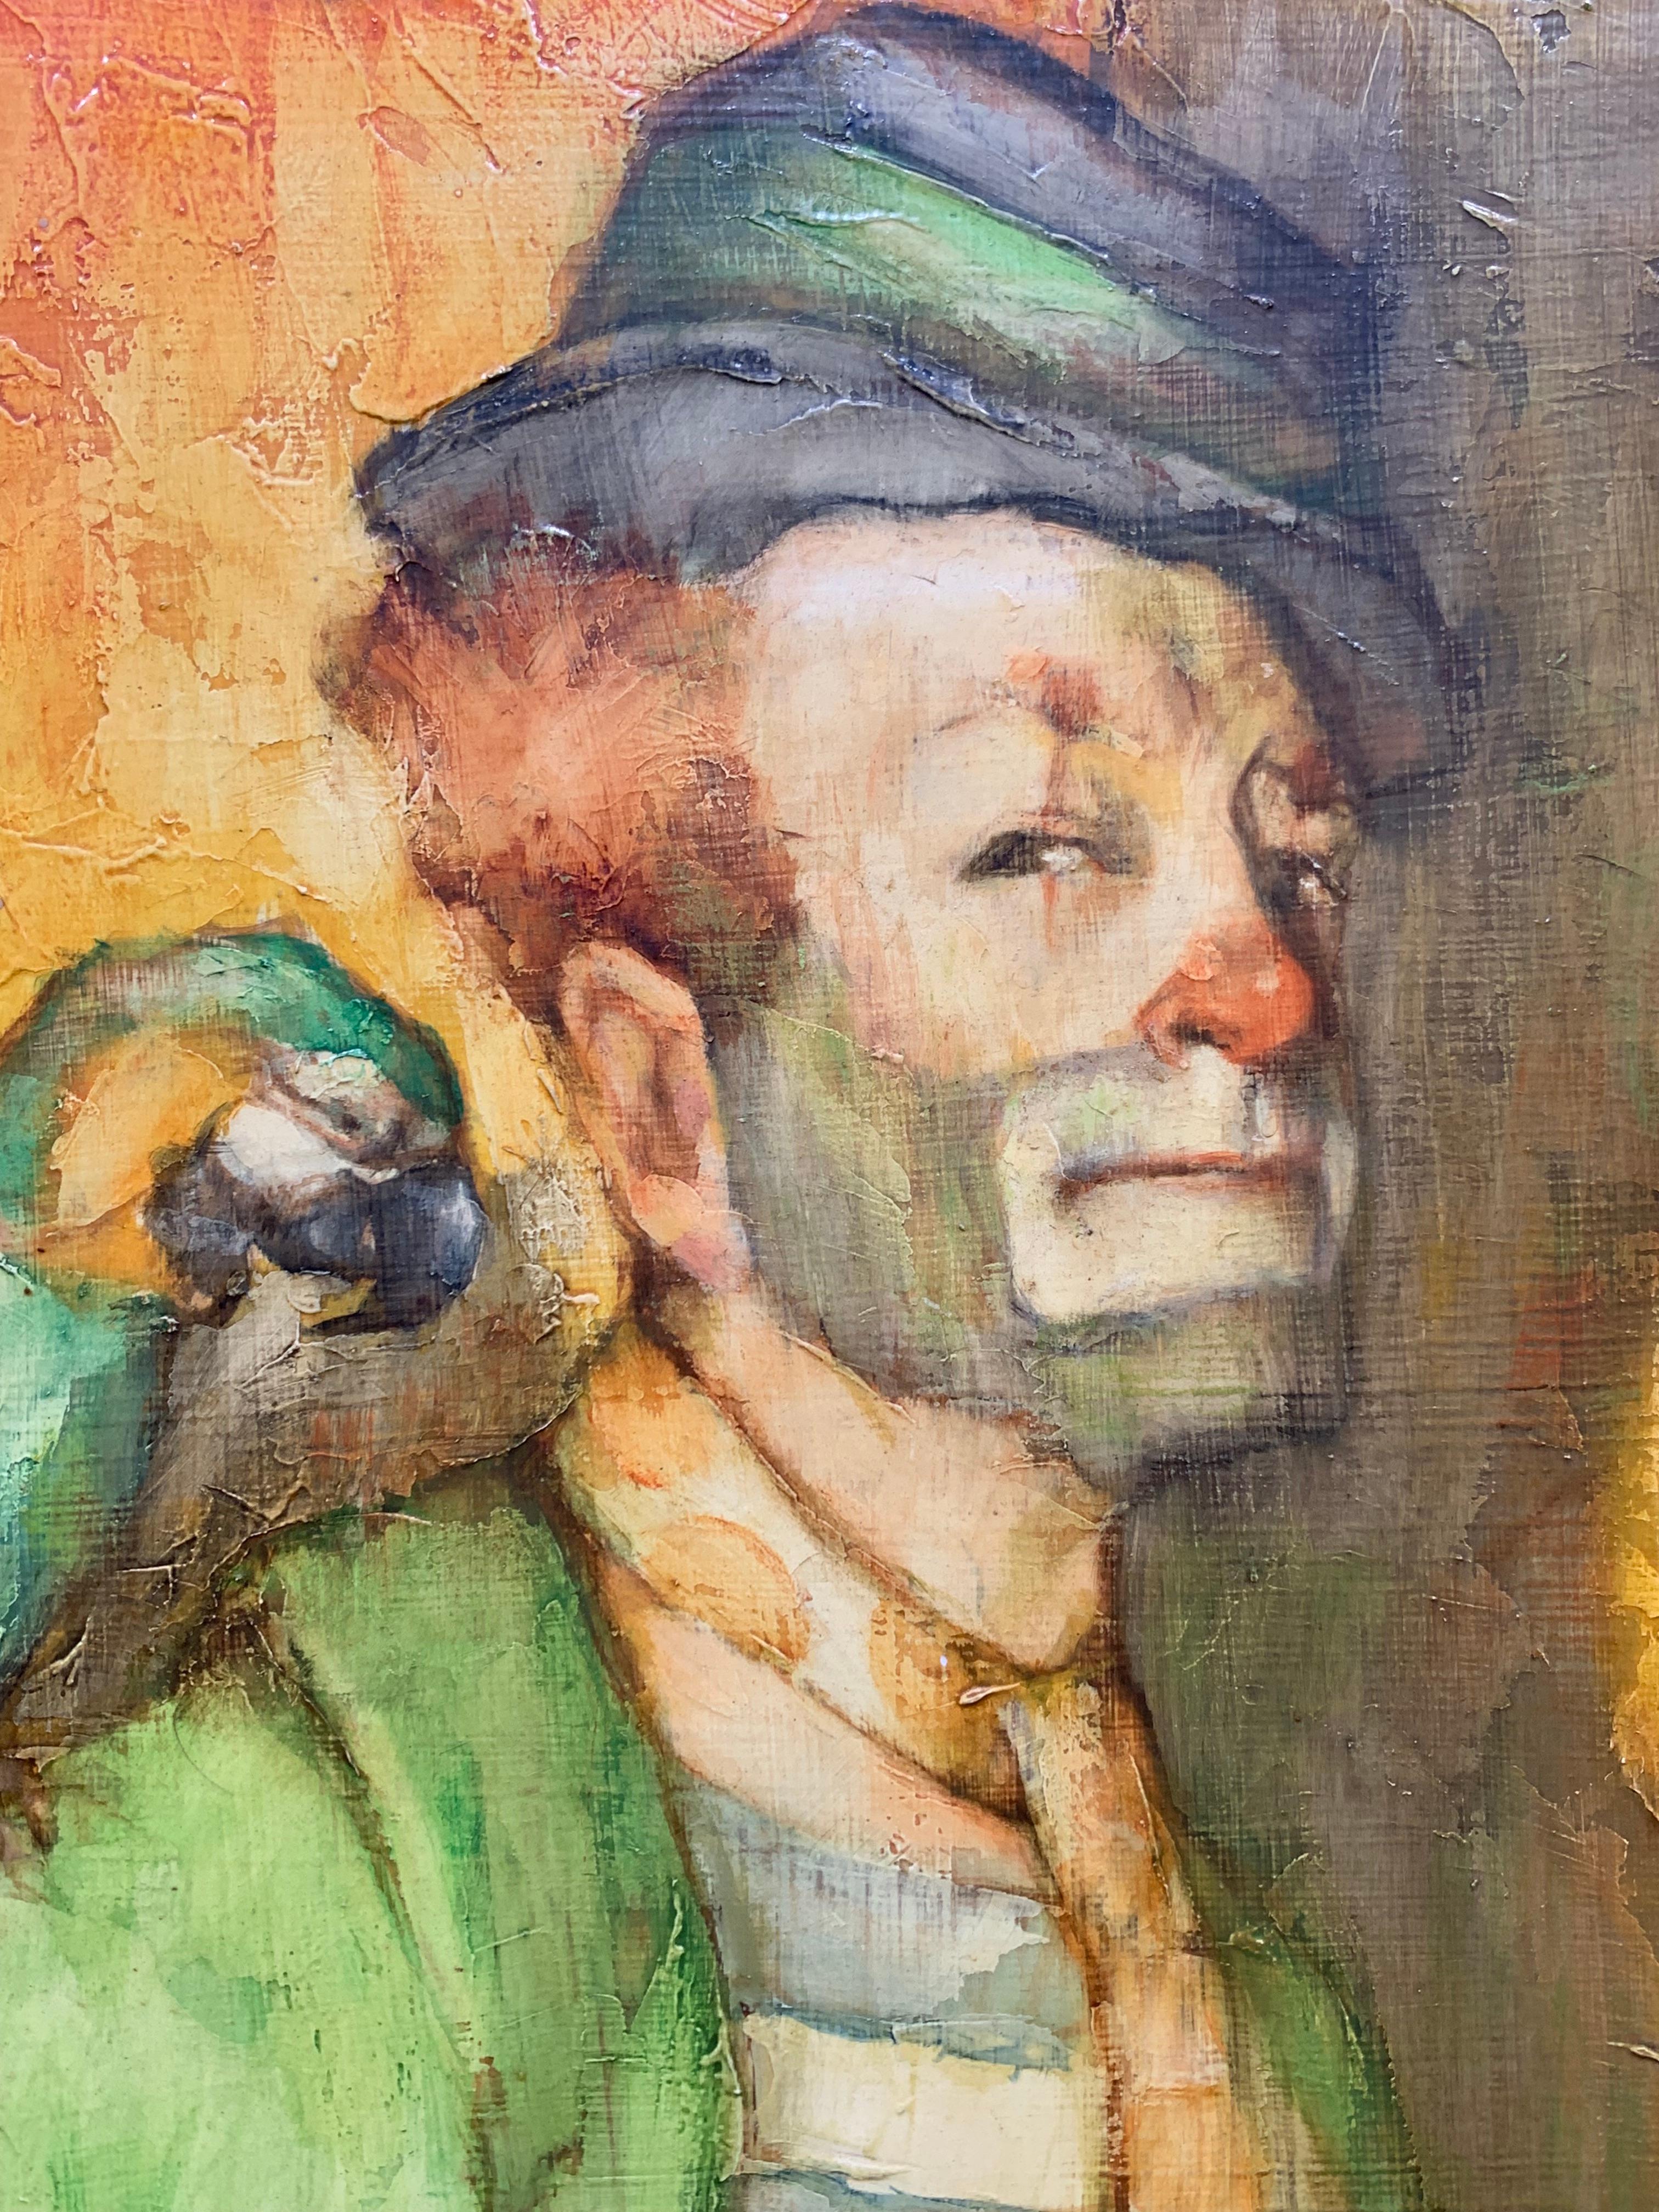 Clown & Parrot  - Painting by Courtland Butterfield